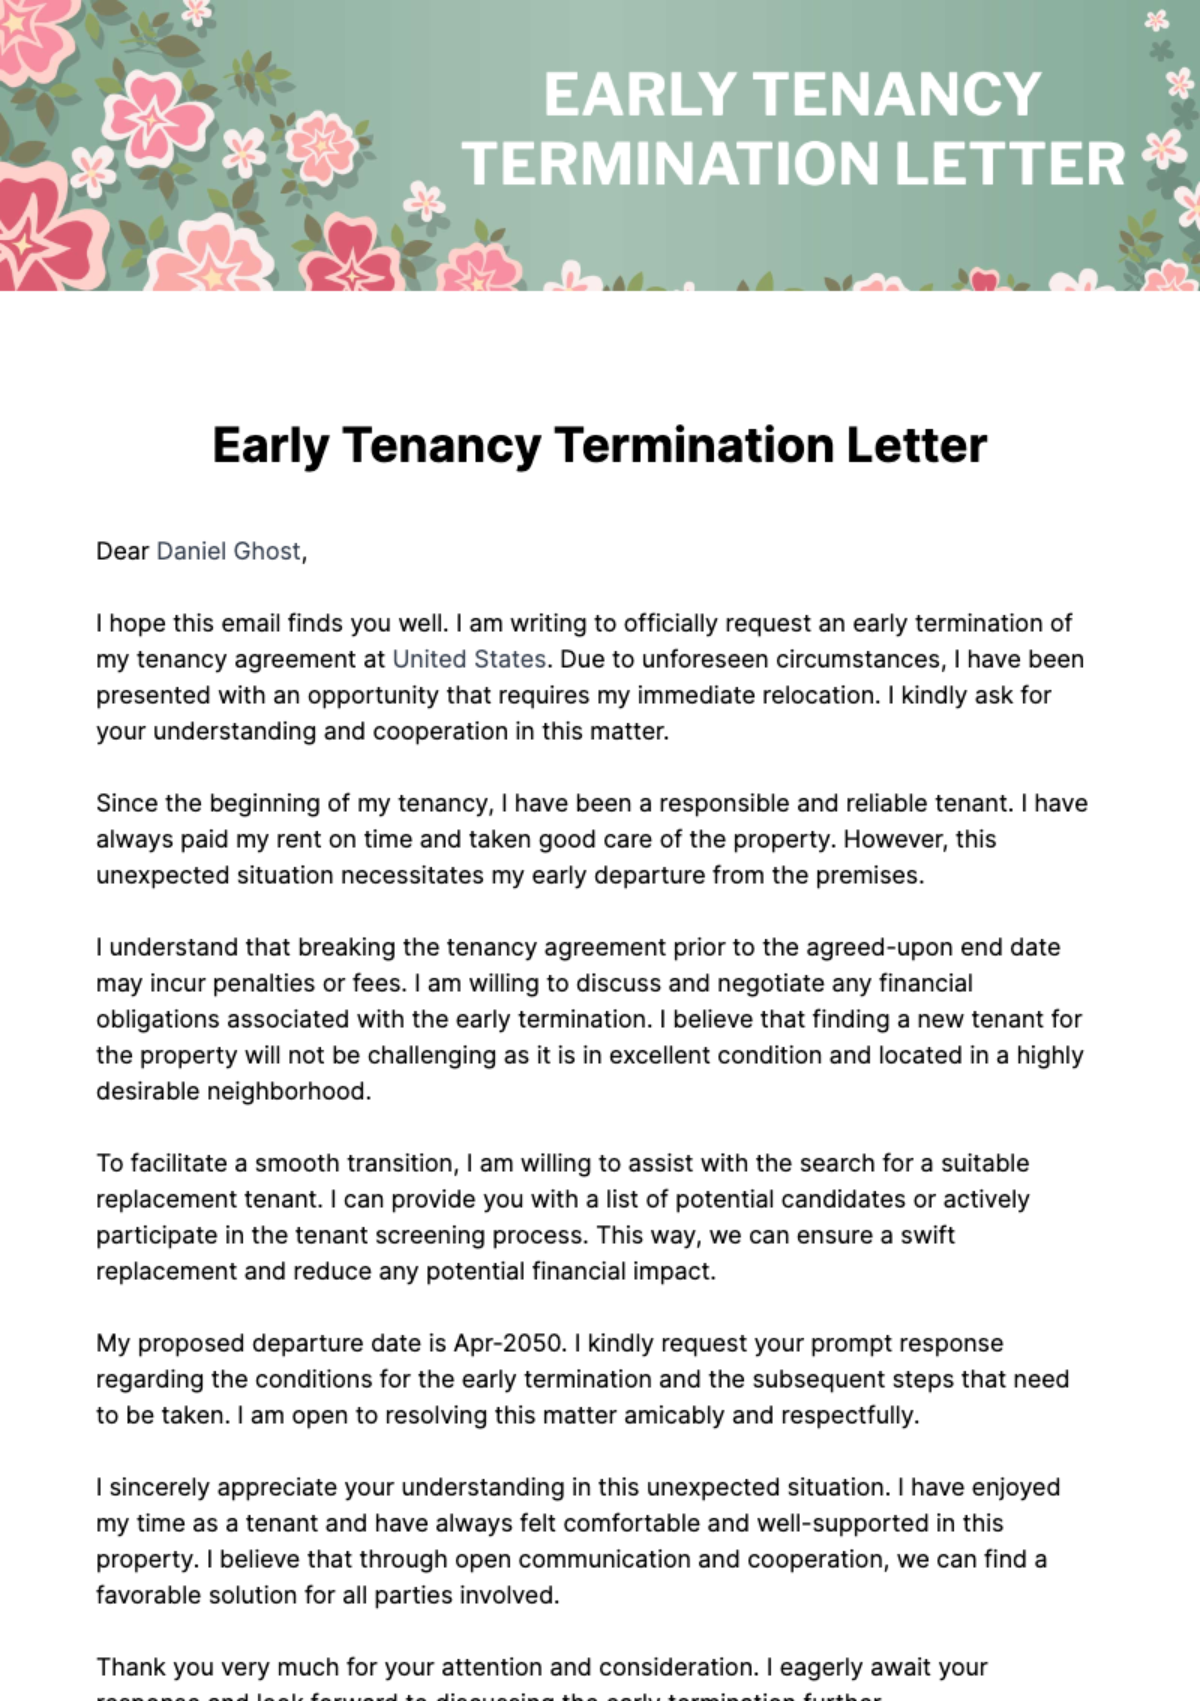 Early Tenancy Termination Letter Template